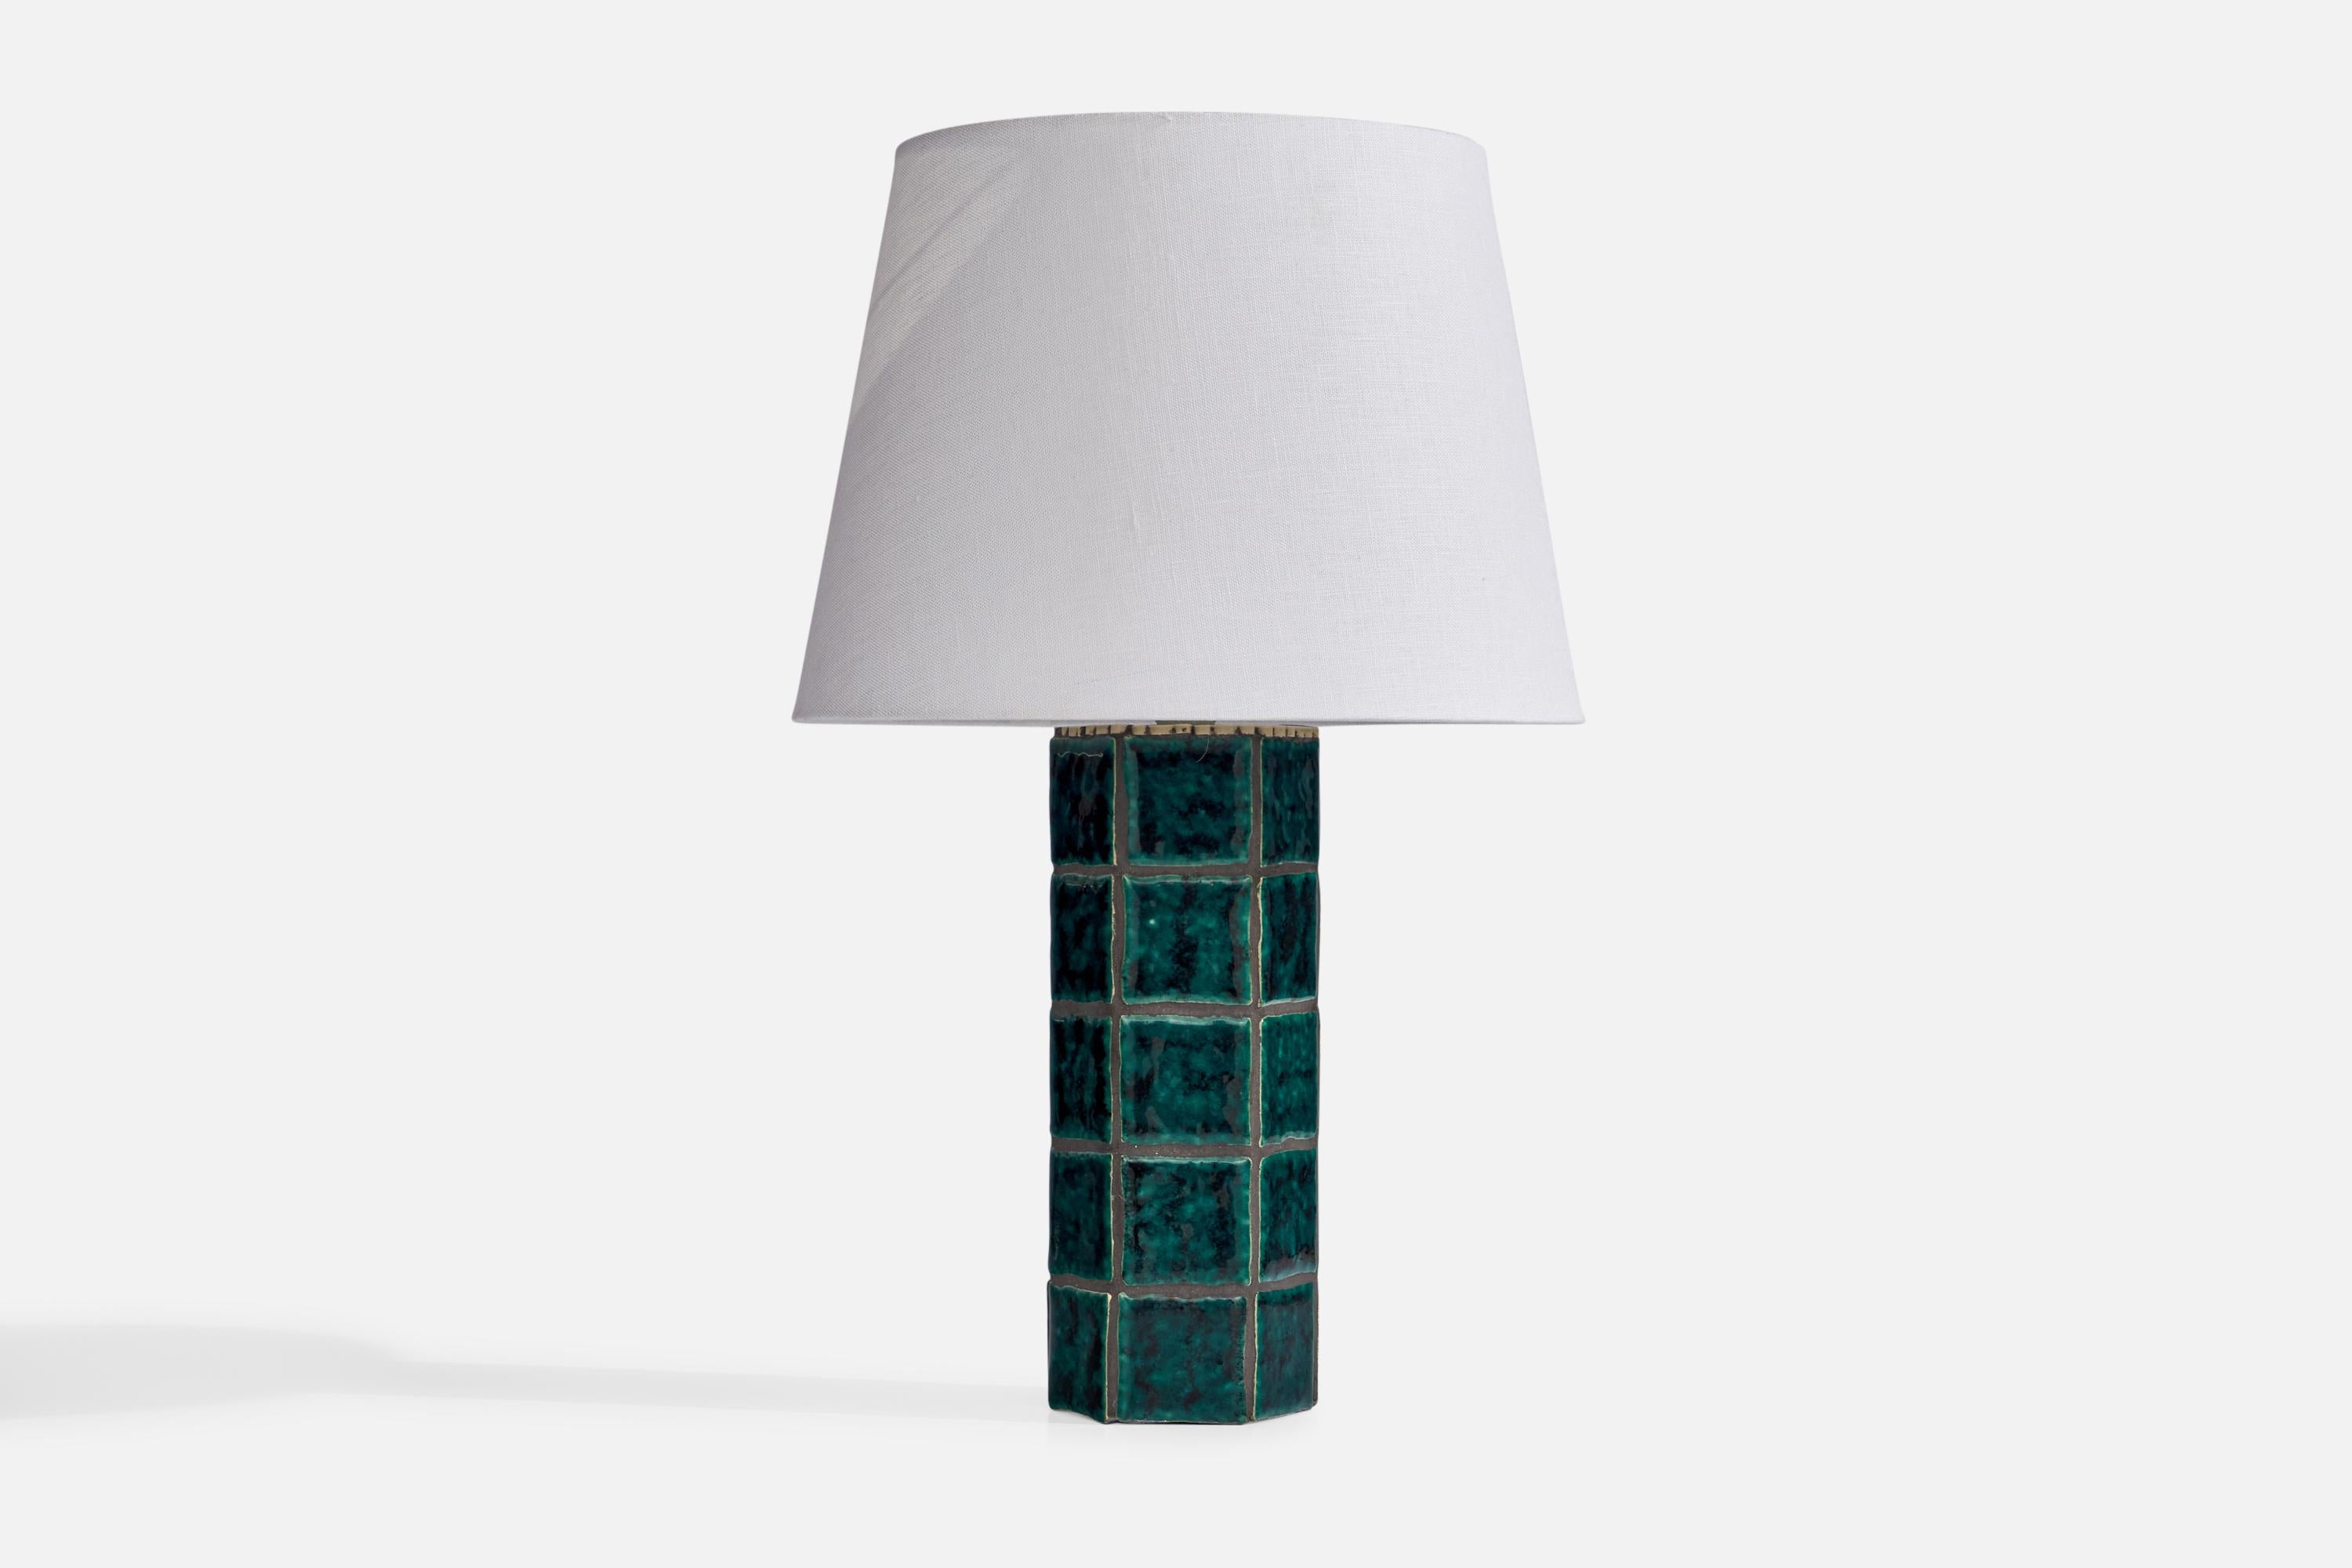 A blue-green ceramic tile table lamp designed and produced in Sweden, 1970s.

Dimensions of Lamp (inches): 13.5” H x 4.25” Diameter
Dimensions of Shade (inches): 9” Top Diameter x 12” Bottom Diameter x 9” H
Dimensions of Lamp with Shade (inches):